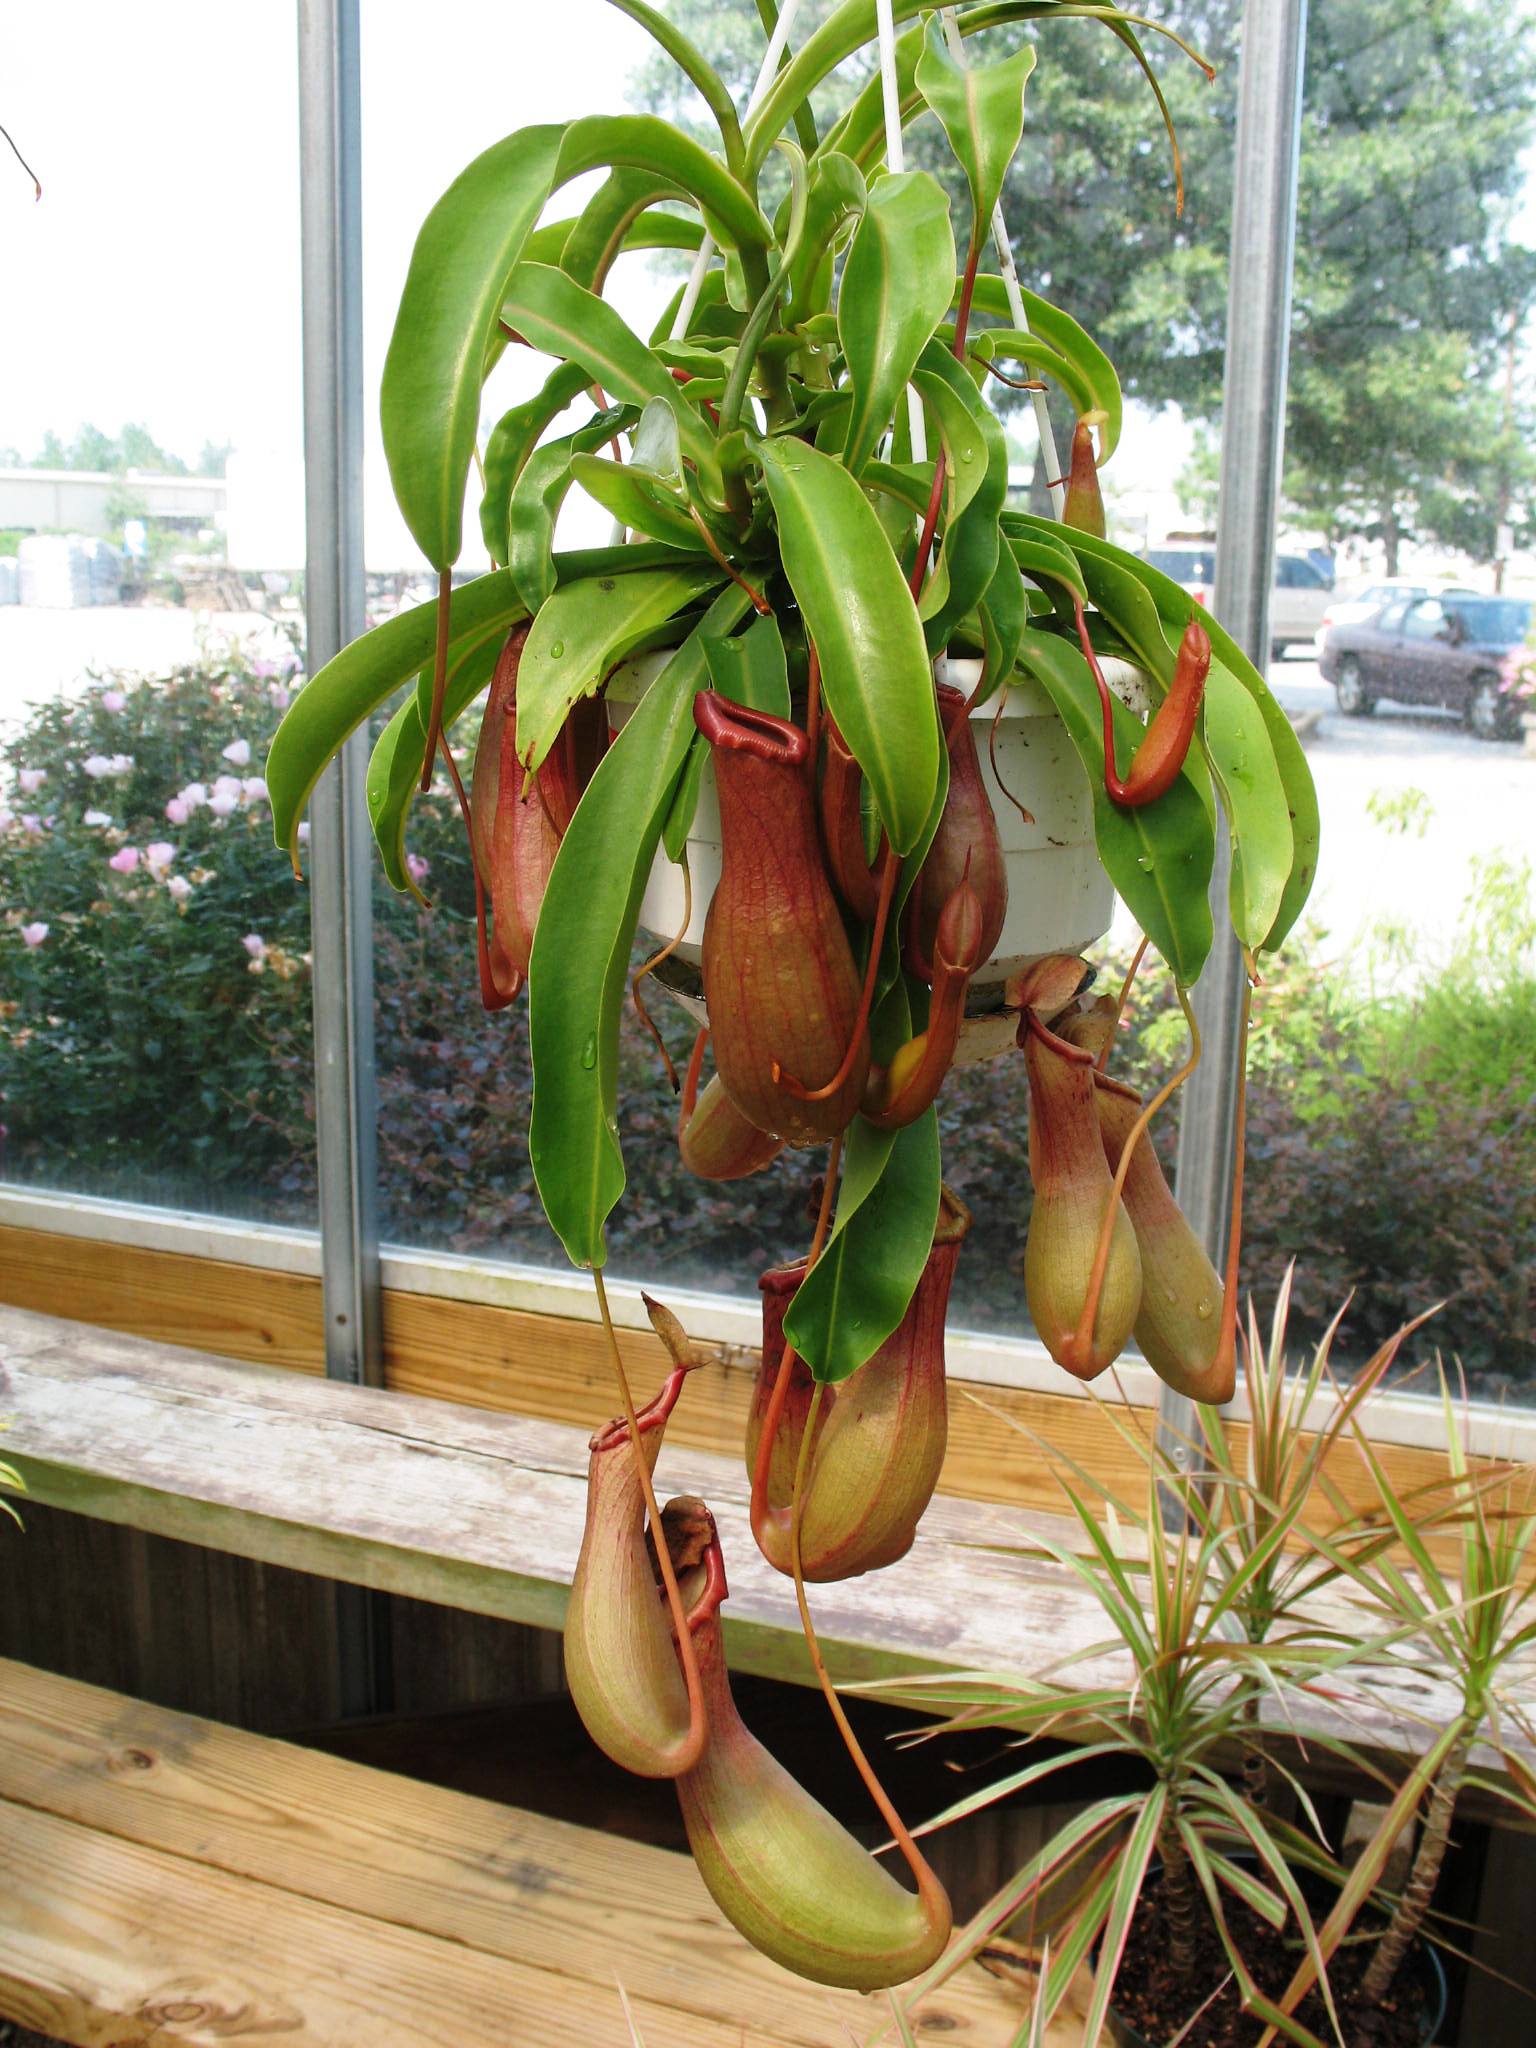 Nepenthes species  / Nepenthes species 